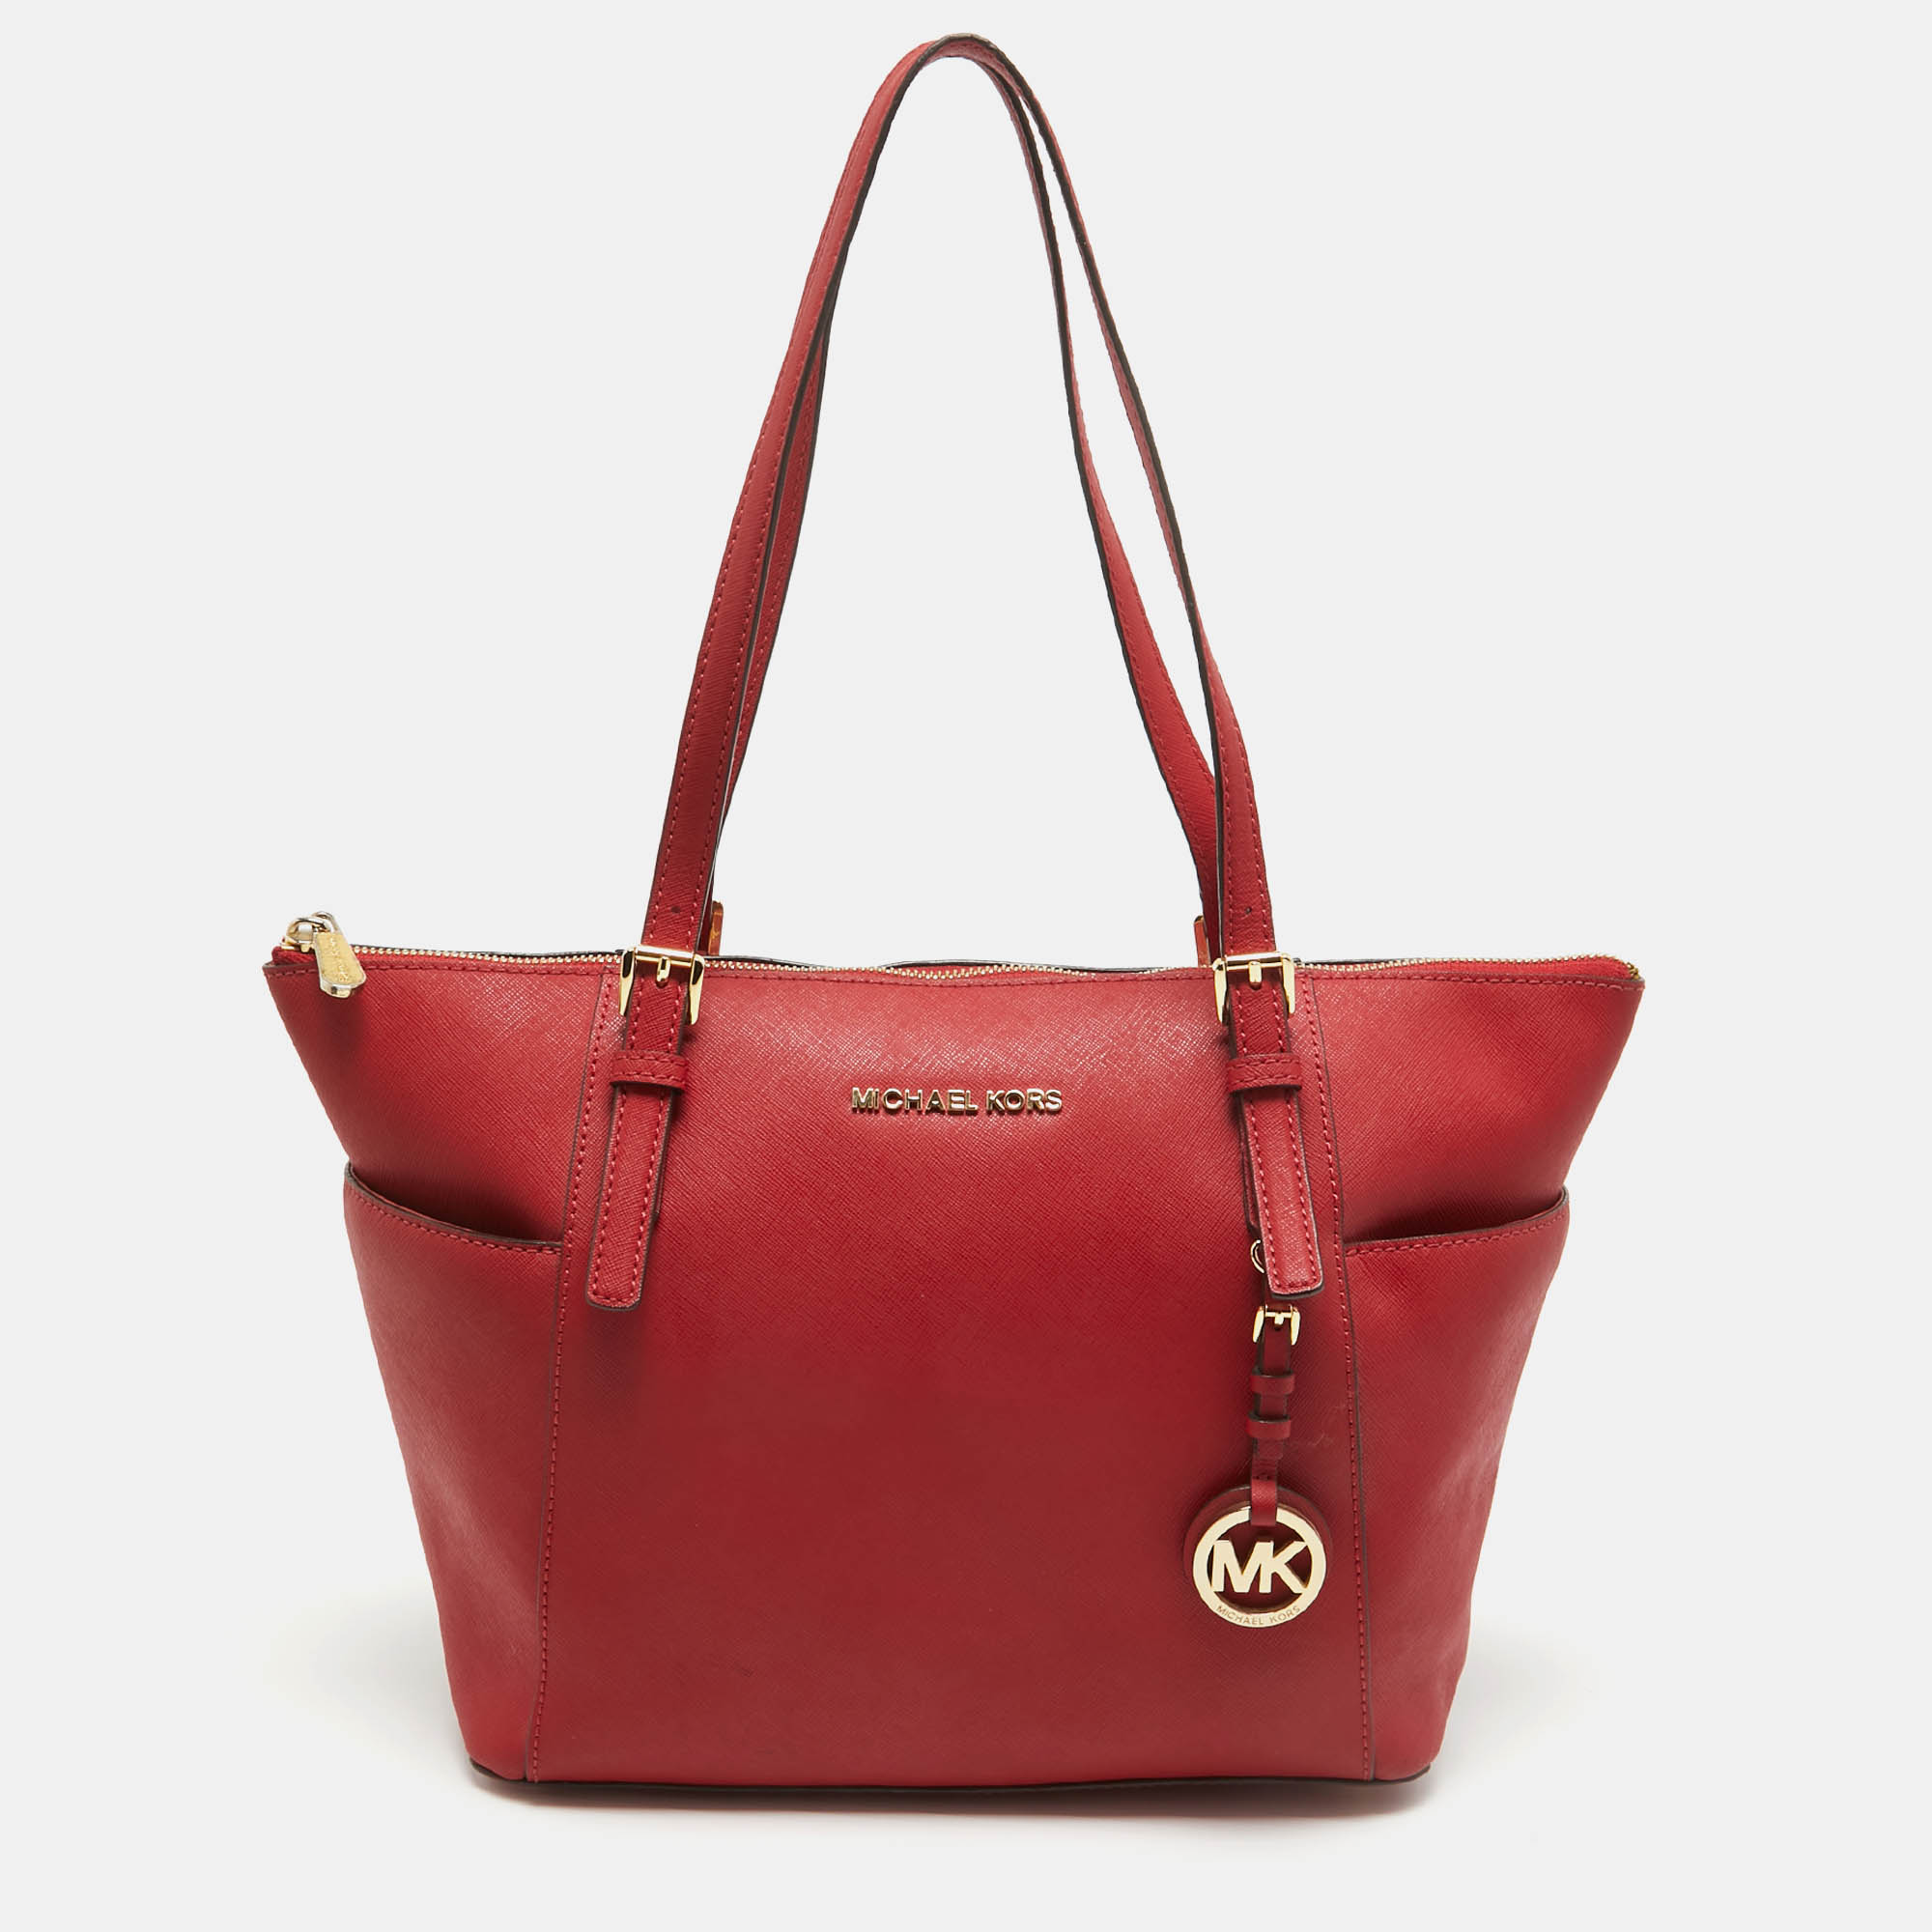 Pre-owned Michael Michael Kors Red Saffiano Leather Jet Set Top Zip Tote